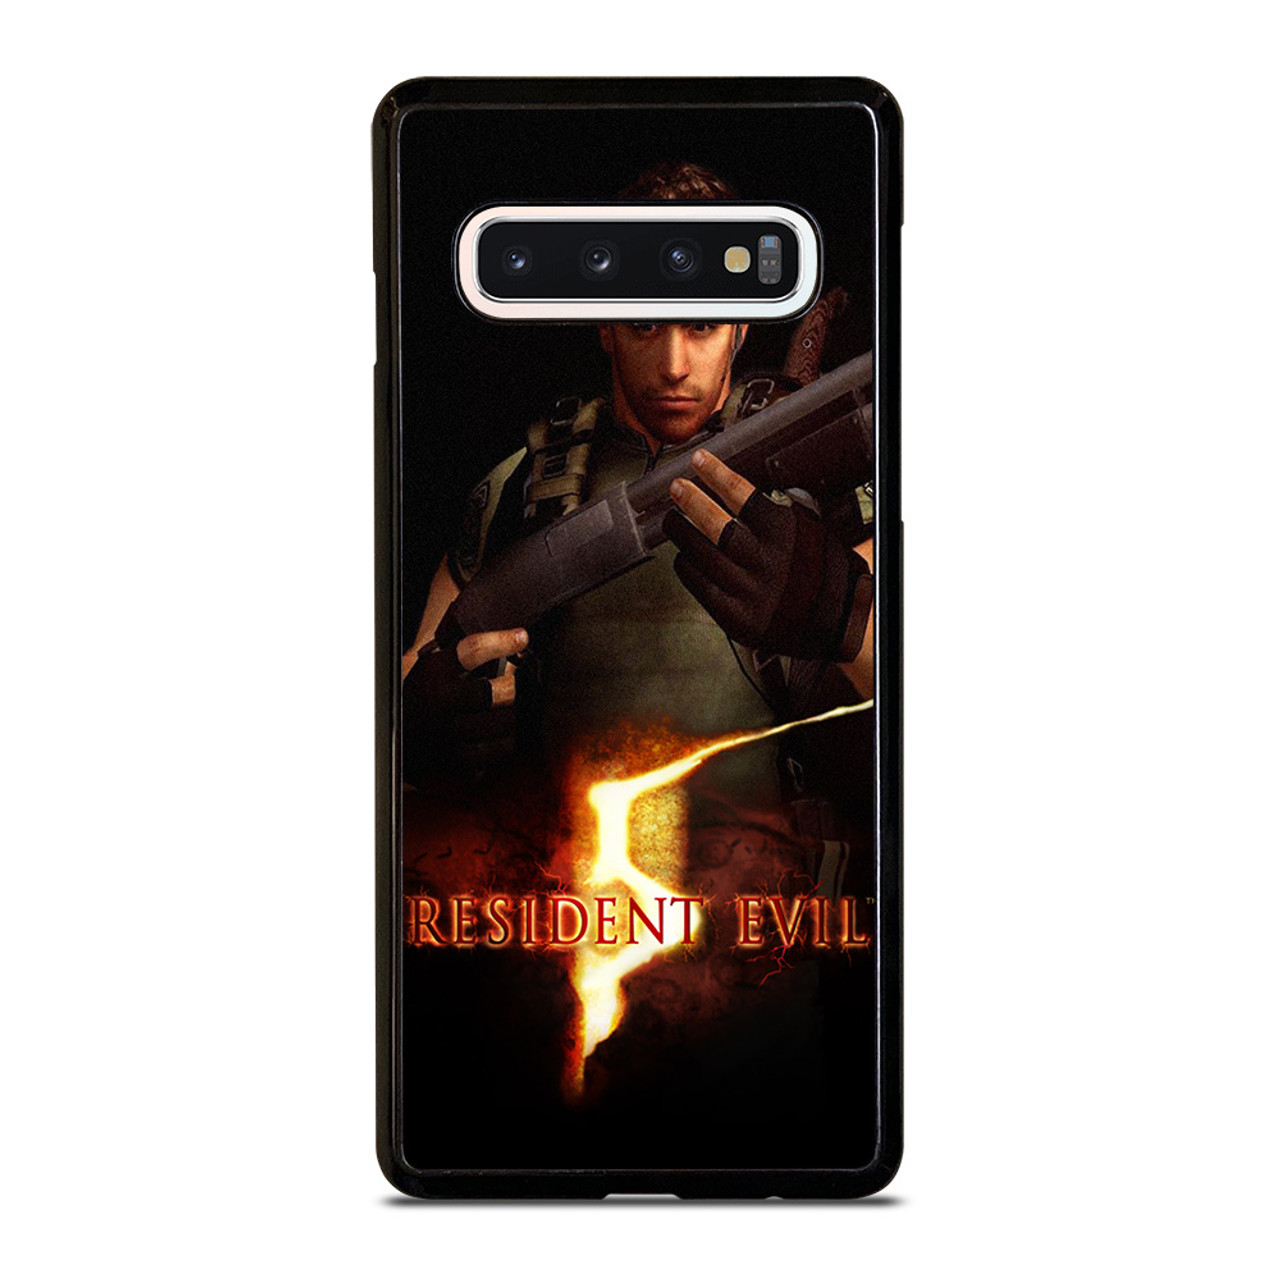 CHRIS REDFIELD RESIDENT EVIL GAMES Samsung Galaxy S10 Case Cover